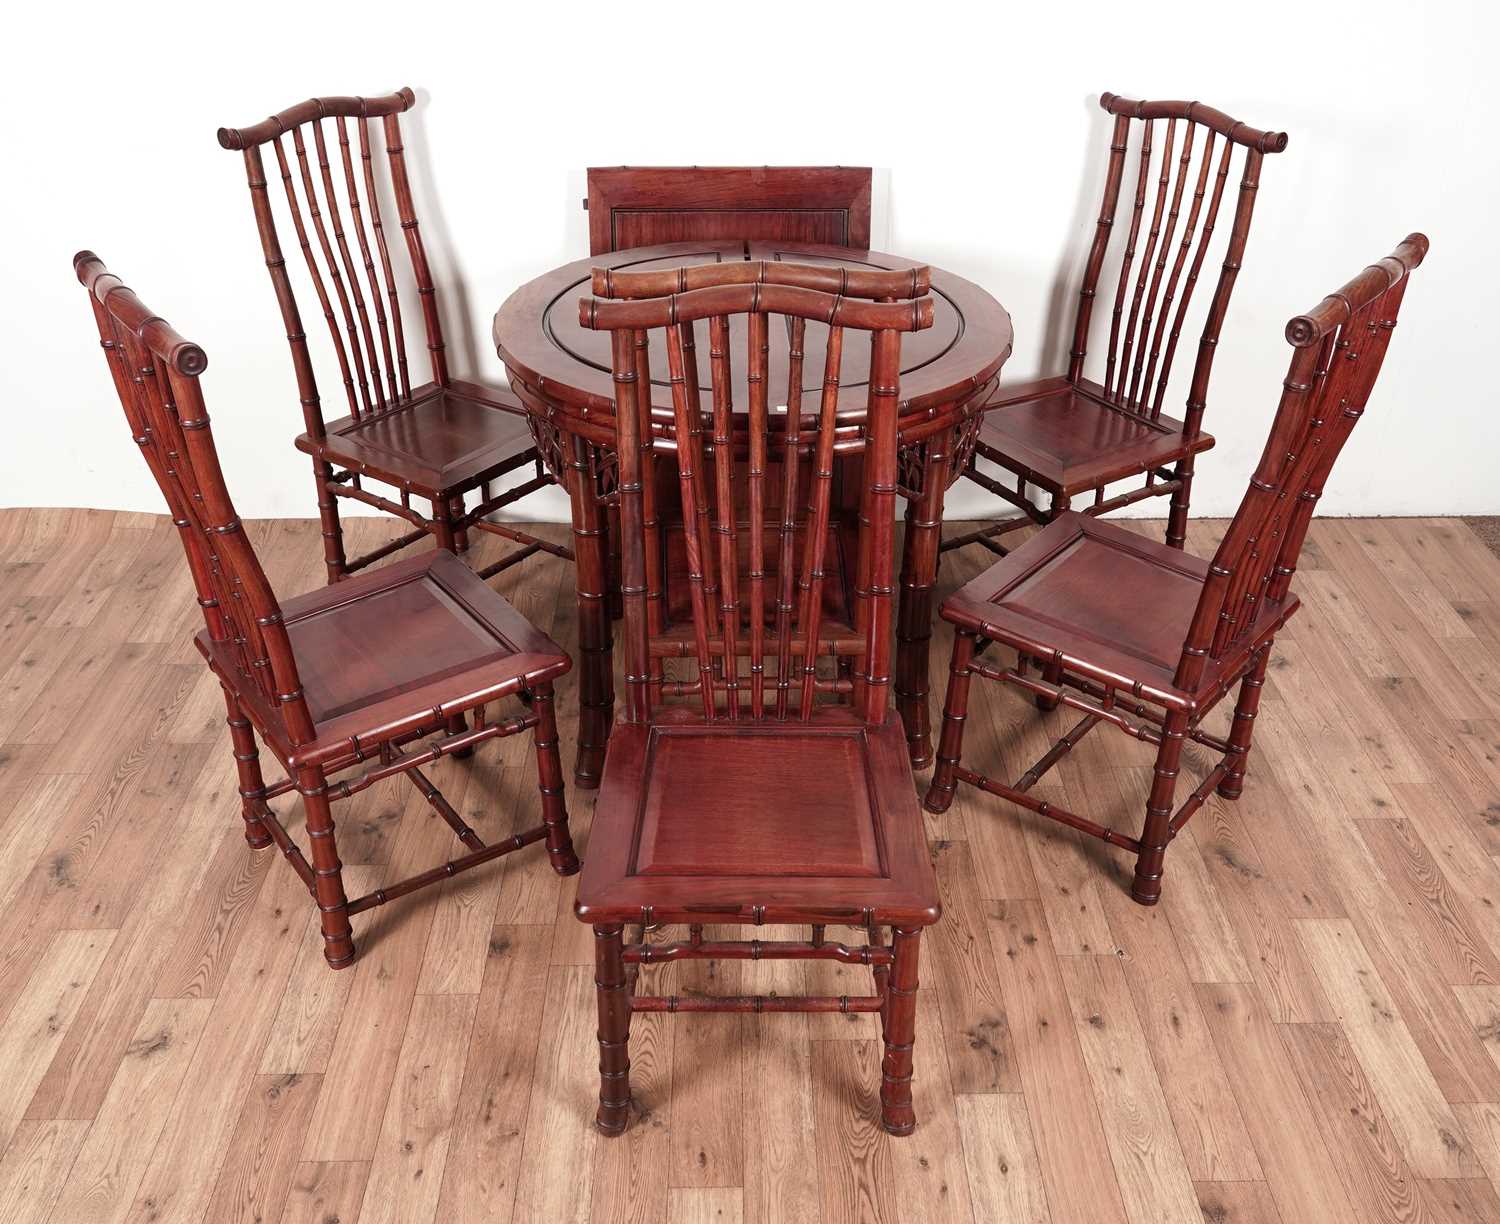 A modern Chinese dining table and six chairs